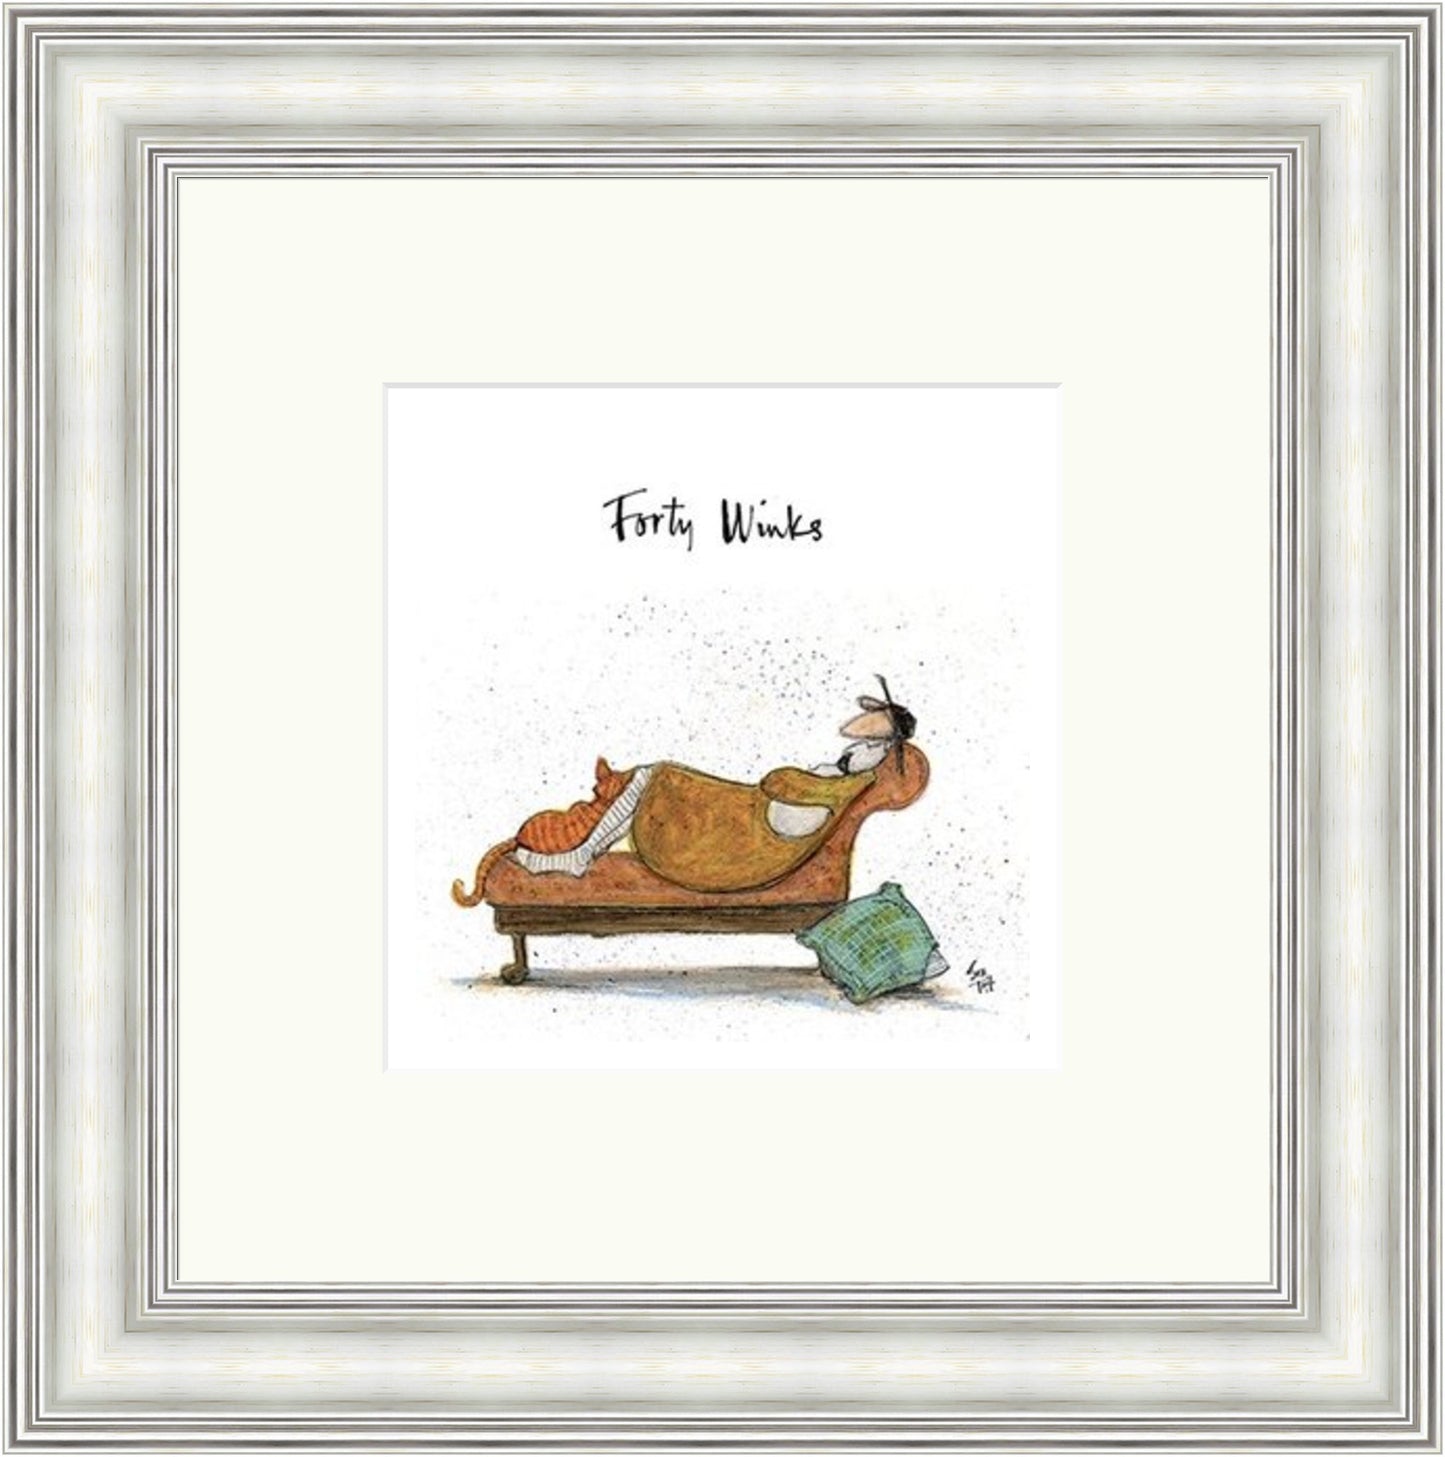 Forty Winks by Sam Toft